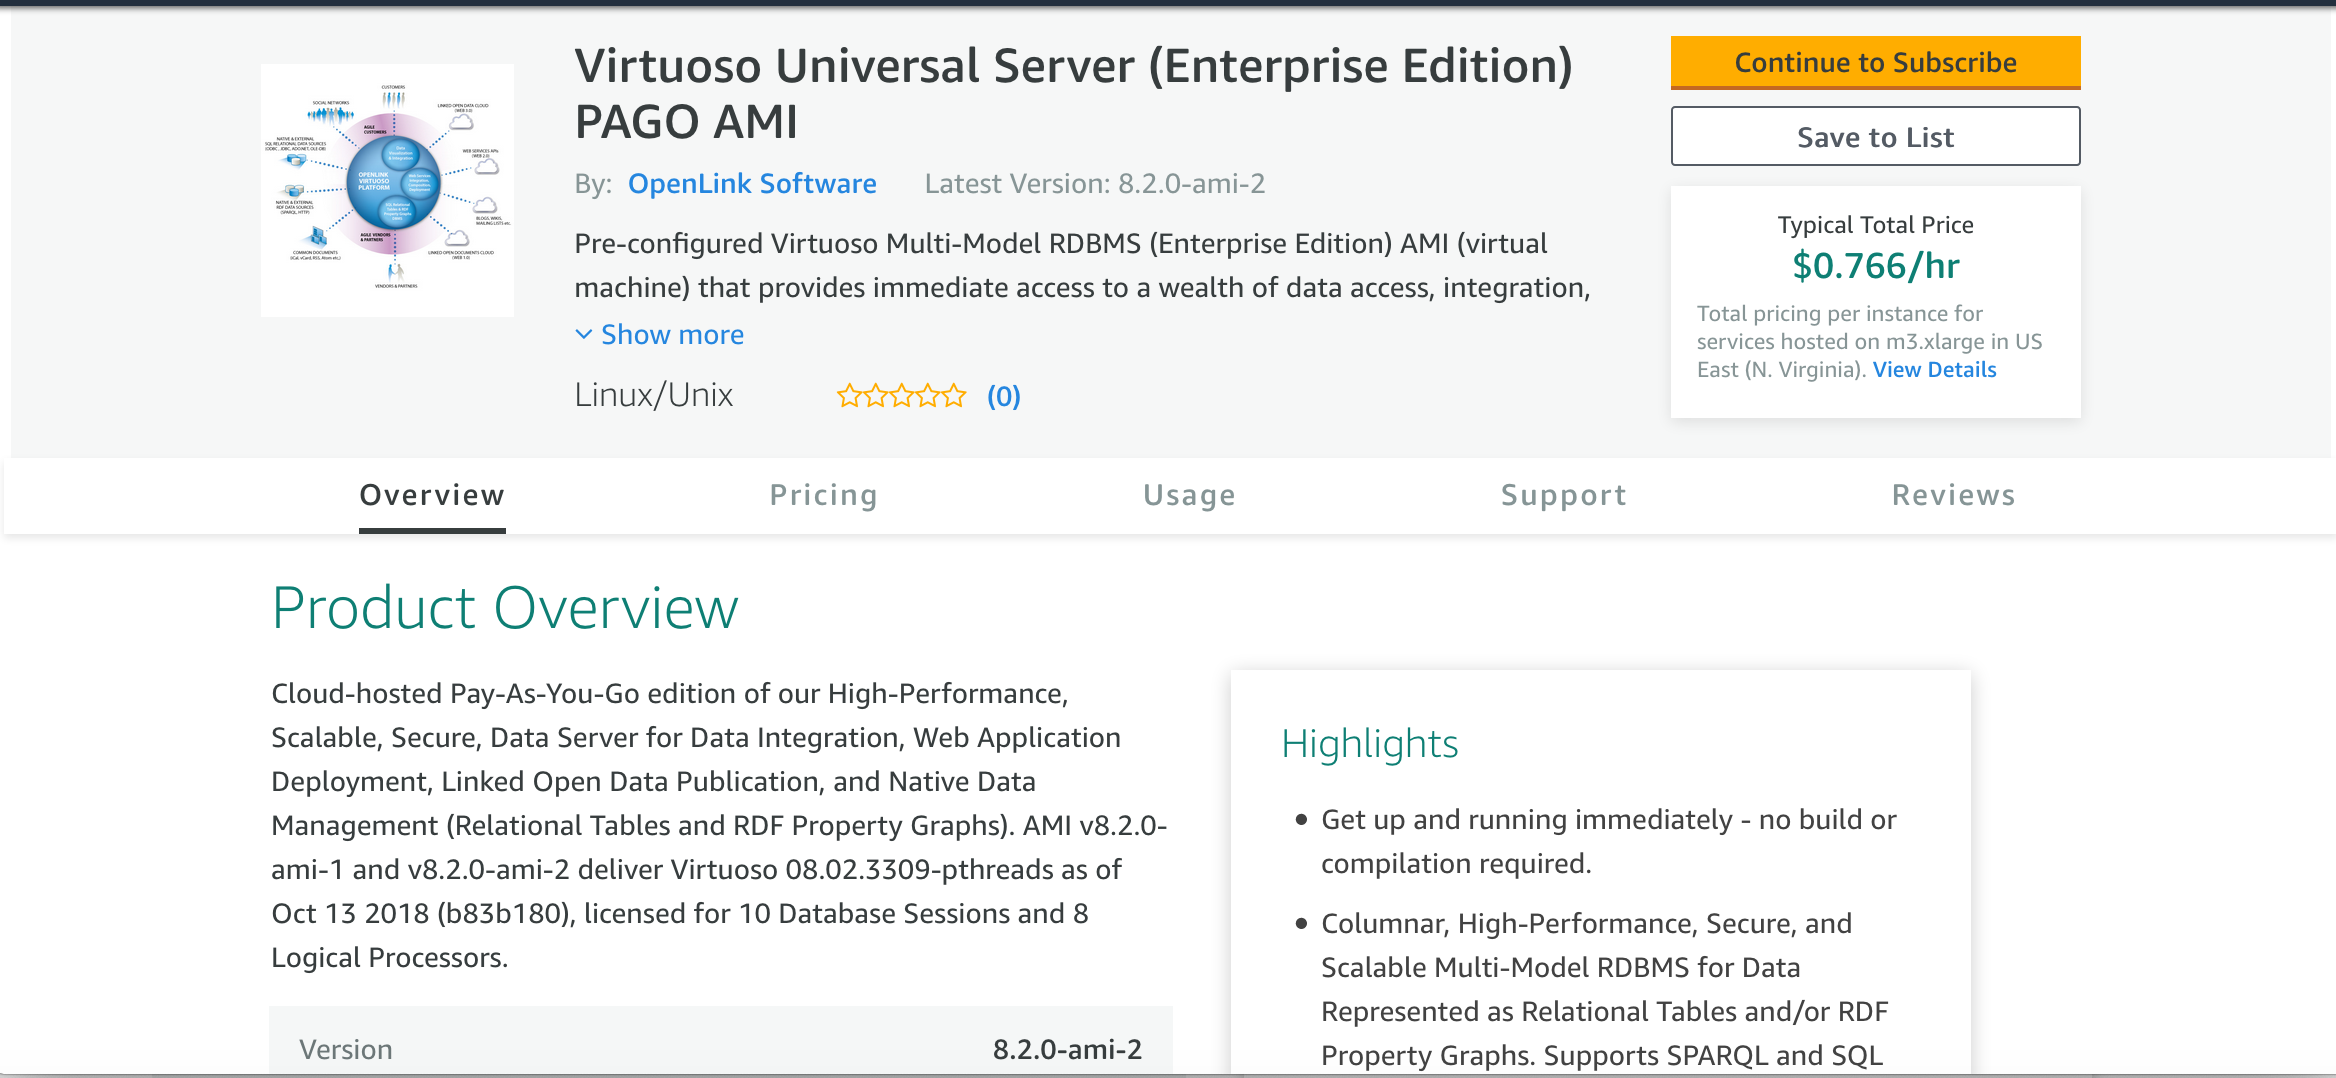 http://www.openlinksw.com/images/virtuoso-82-pago-ami-aws-marketplace.png